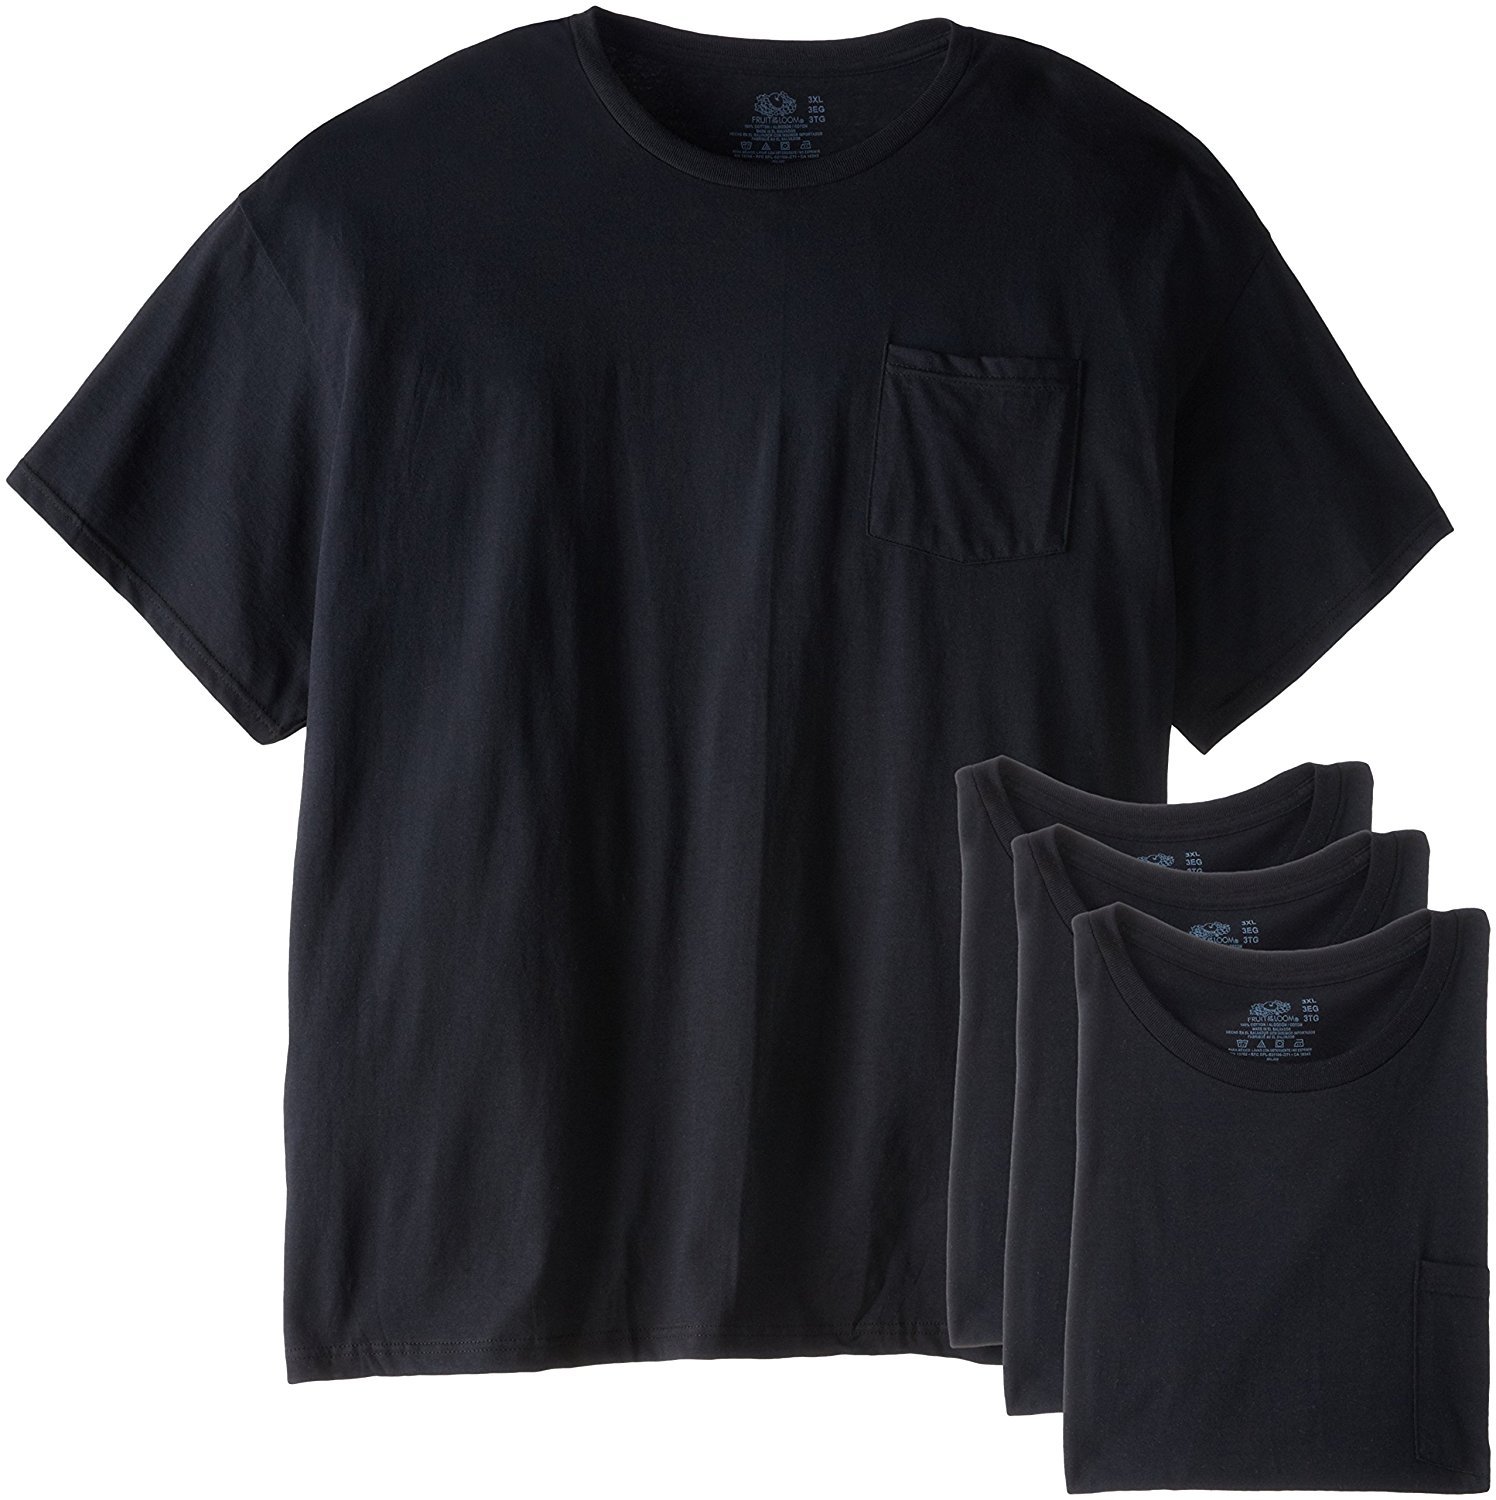 Fruit of the Loom Men's Pocket T-Shirts L-3X 4-PACK Black or Gray COTTON